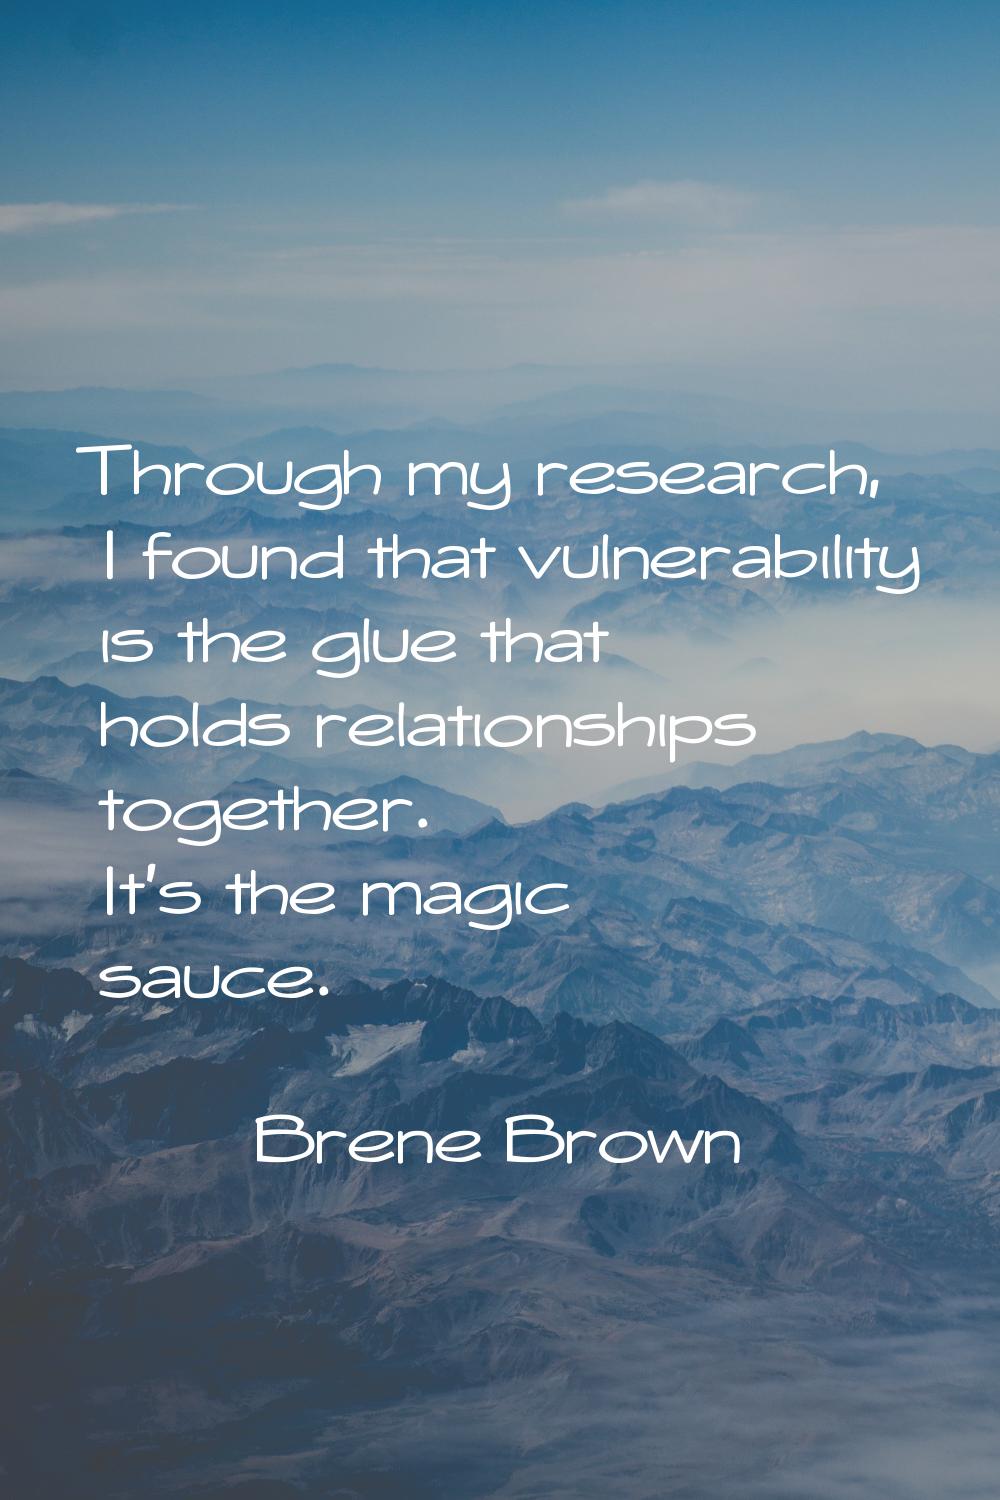 Through my research, I found that vulnerability is the glue that holds relationships together. It's